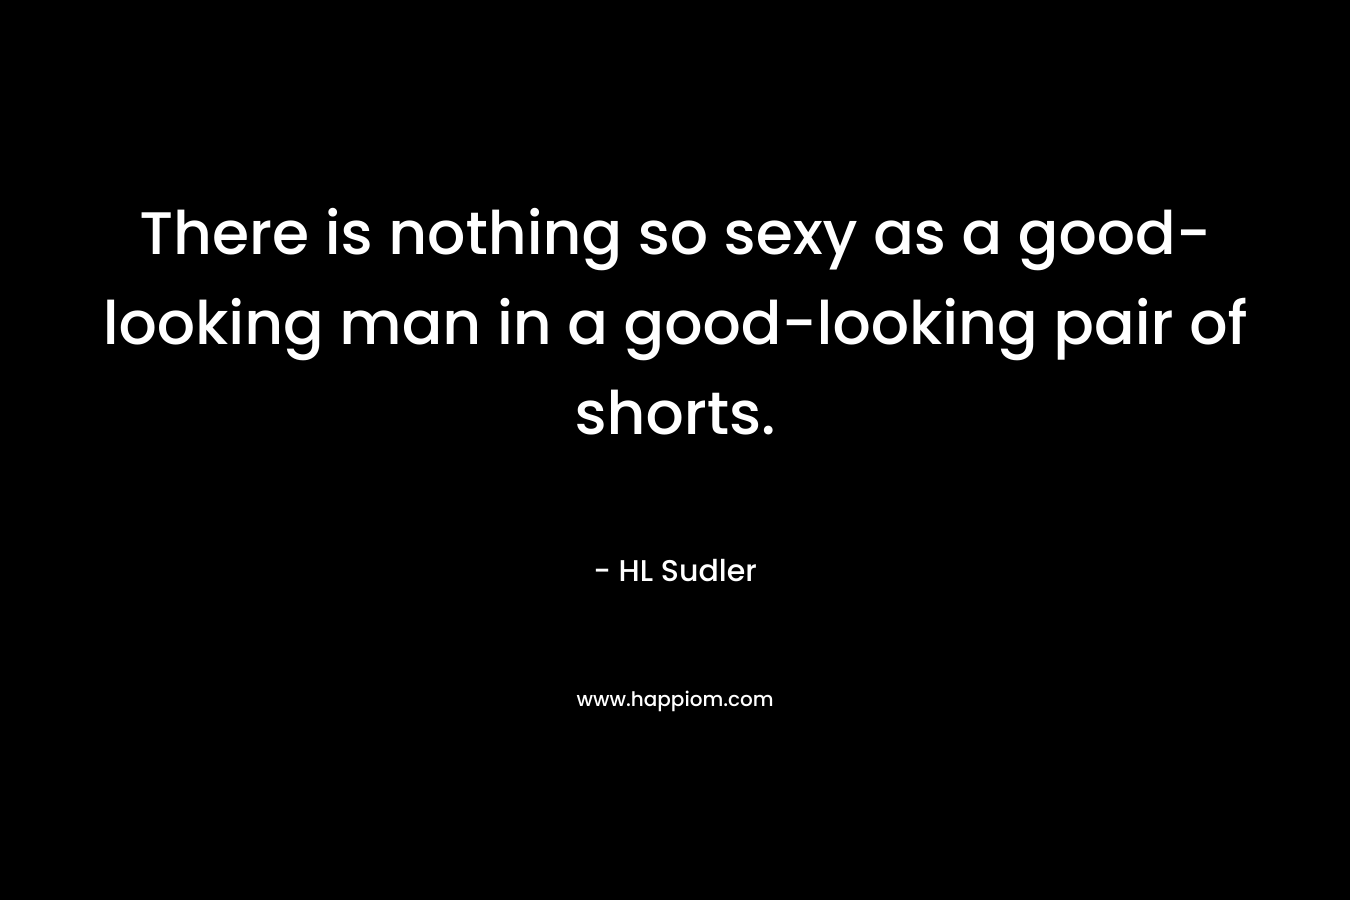 There is nothing so sexy as a good-looking man in a good-looking pair of shorts. – HL Sudler